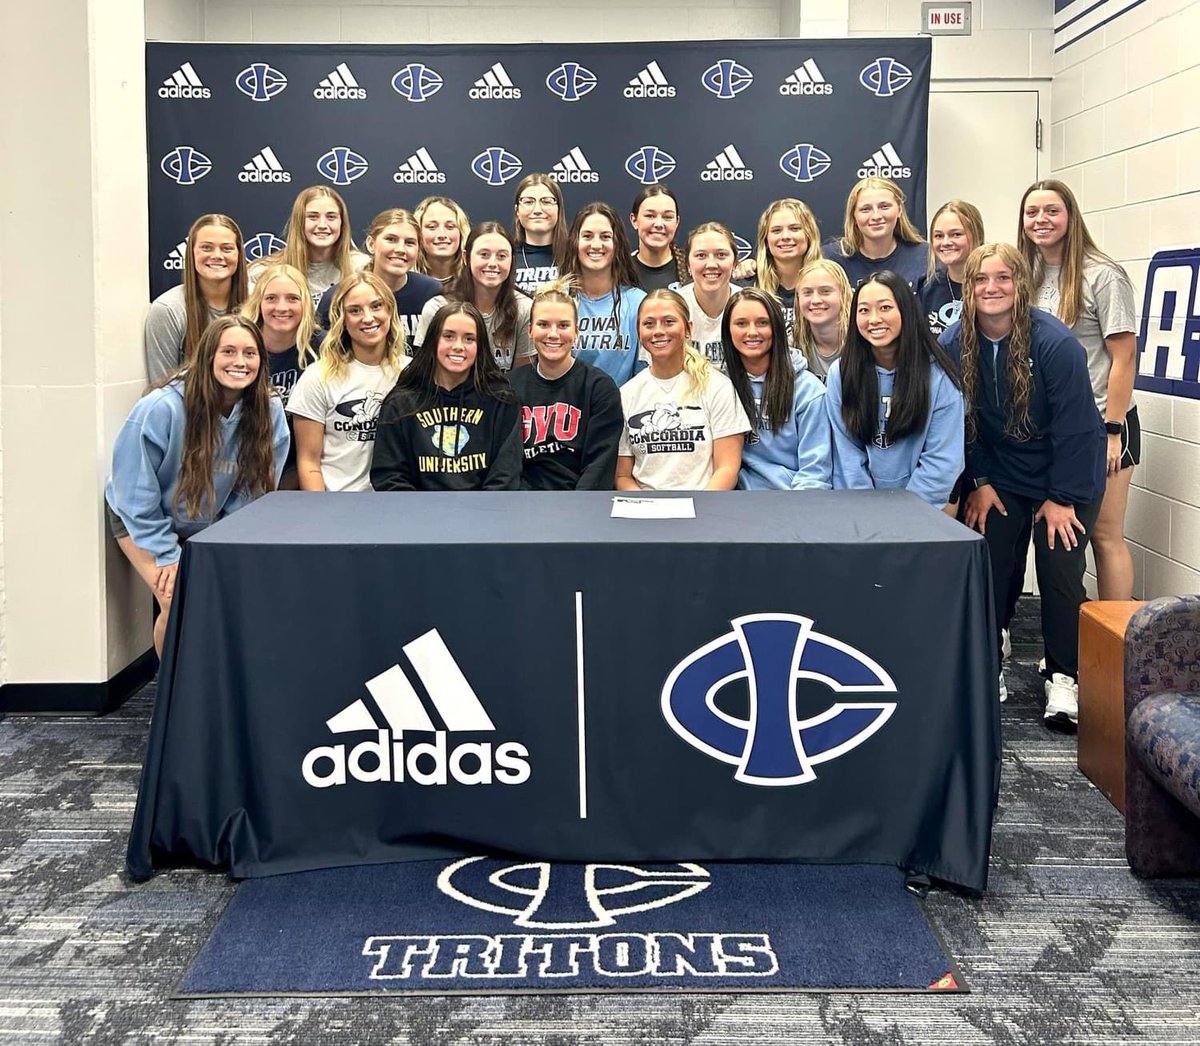 ℕ𝕖𝕩𝕥 𝕤𝕥𝕠𝕡 📍Des Moines, IA

Congratulations 𝑮𝒂𝒃𝒓𝒊𝒆𝒍𝒍𝒂 𝑻𝒂𝒃𝒆𝒓 on signing to play on at Grand View University! We’re so proud of you Ella! Your future is bright! #committed #TheTritonWay #tritonexcellence